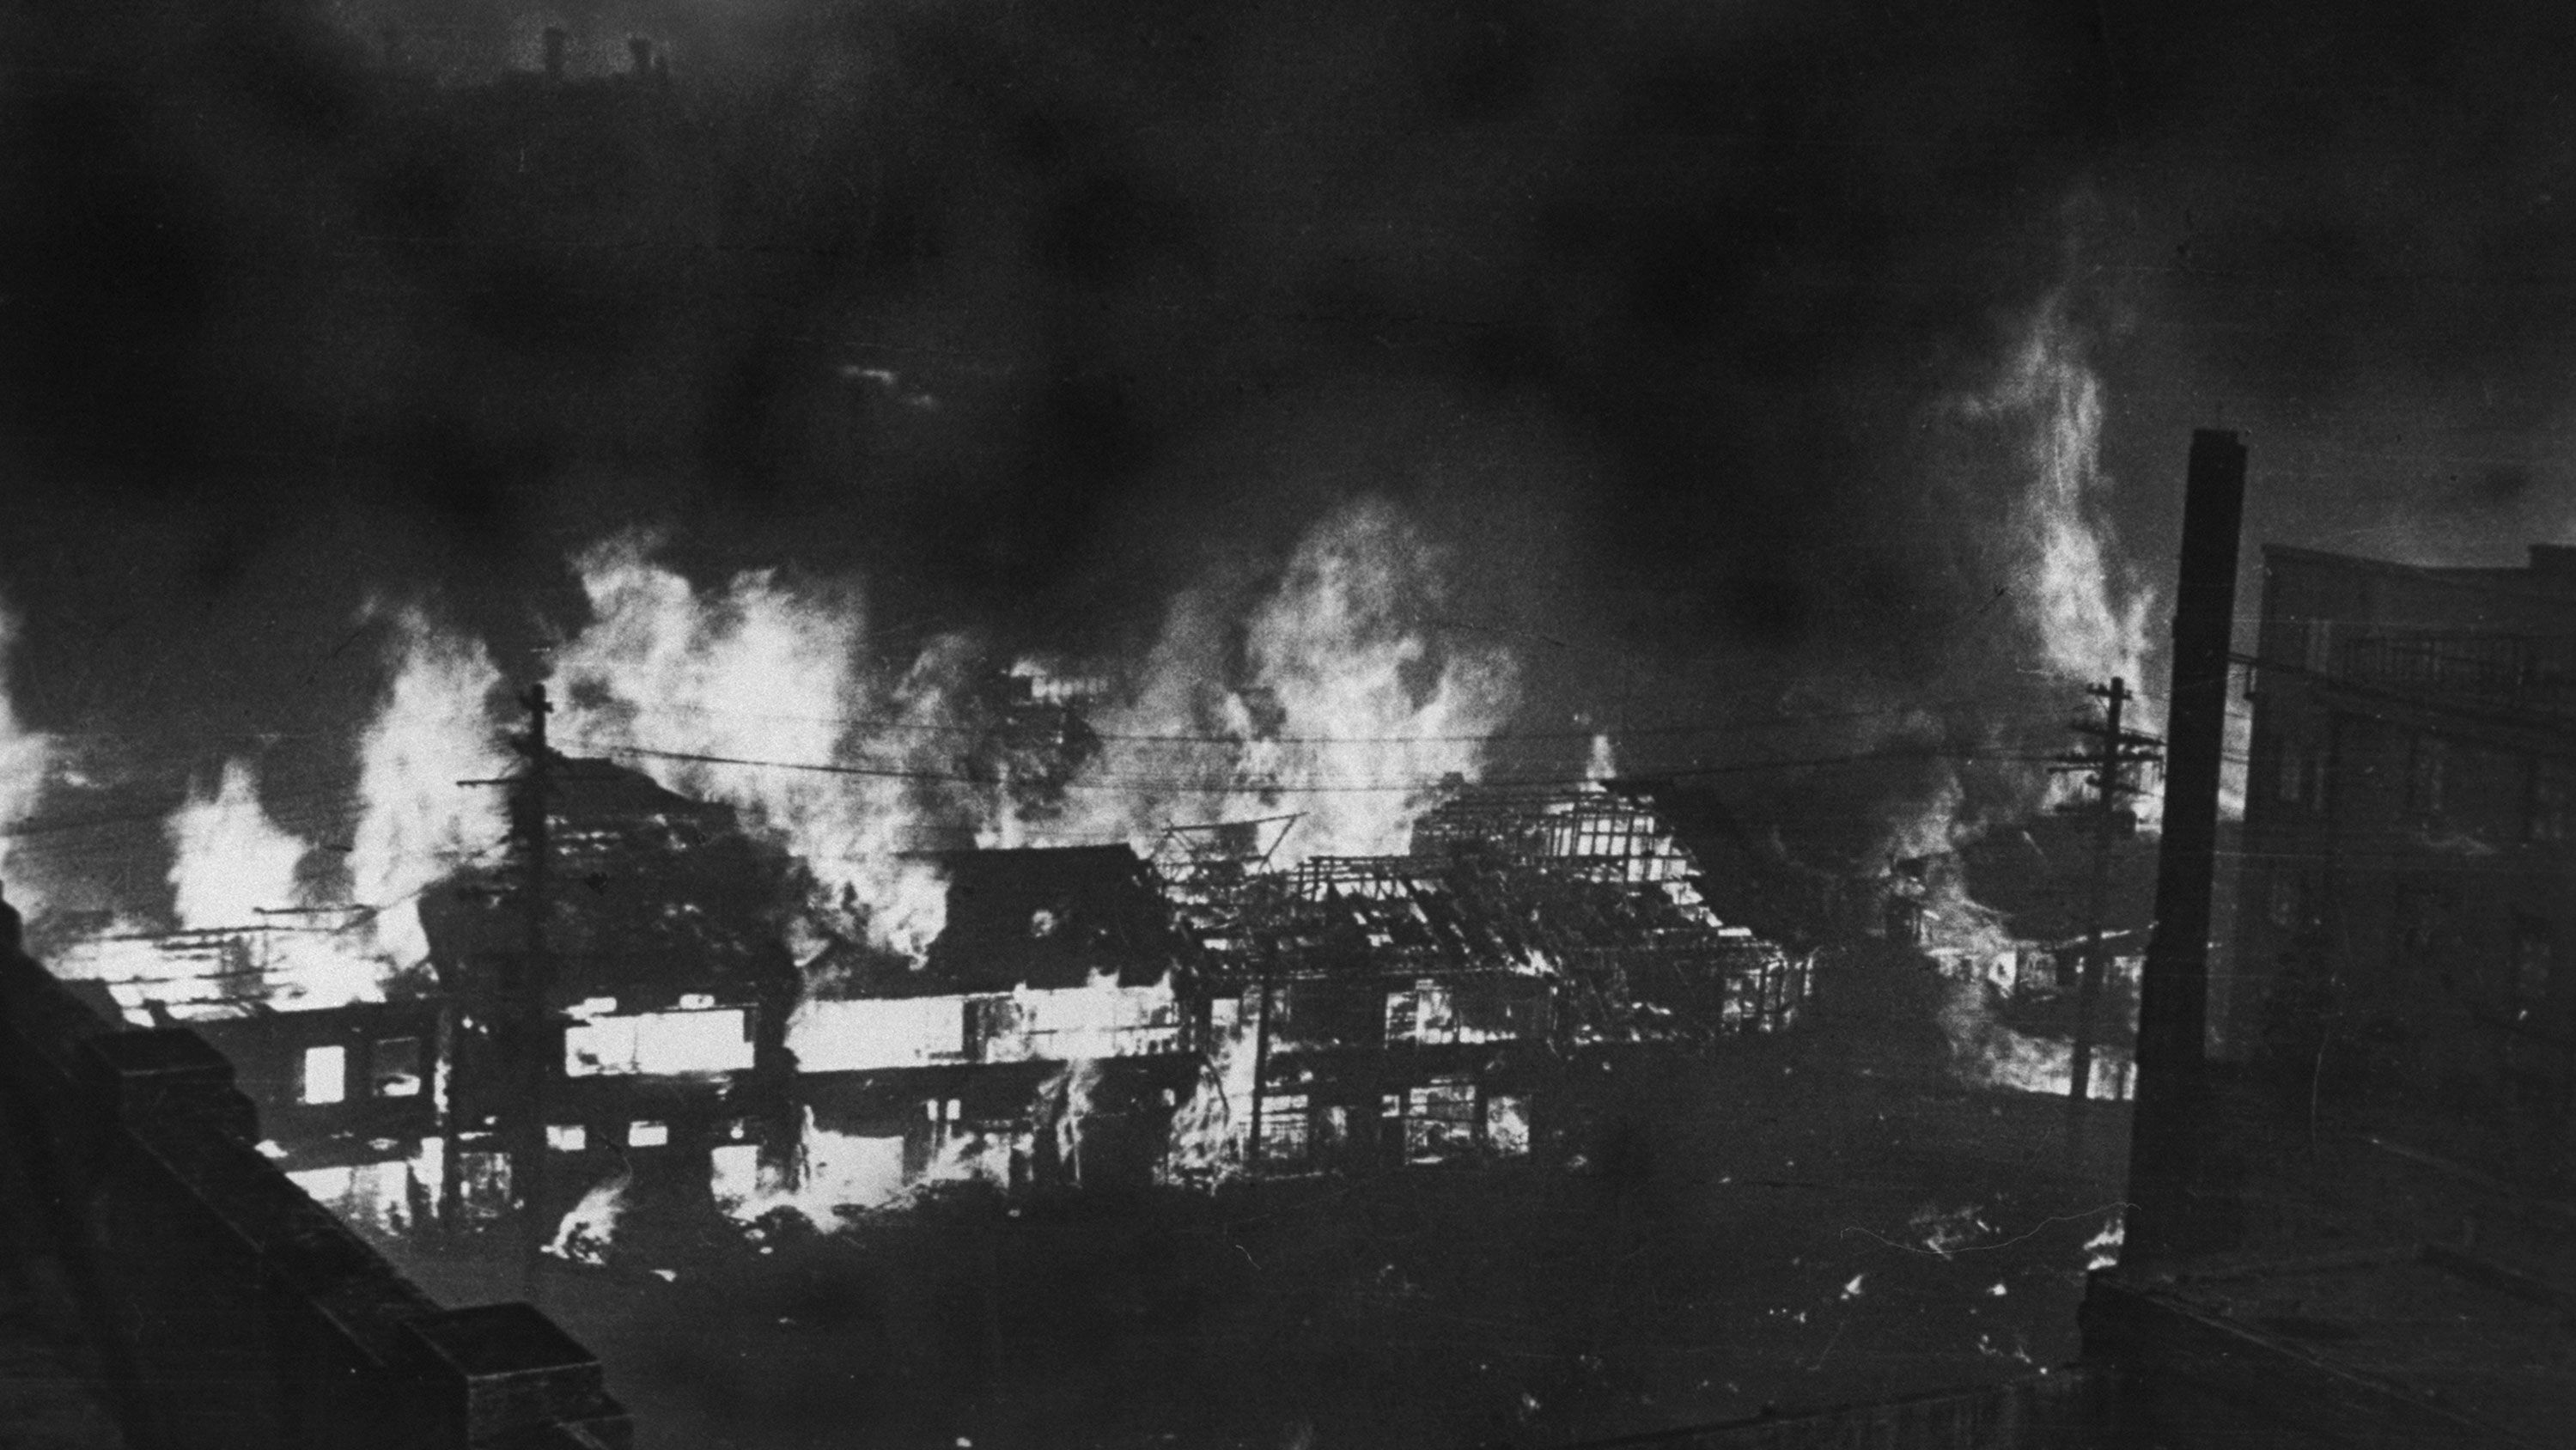 Japanese government photo shows buildings aflame after World War II firebomb raid.